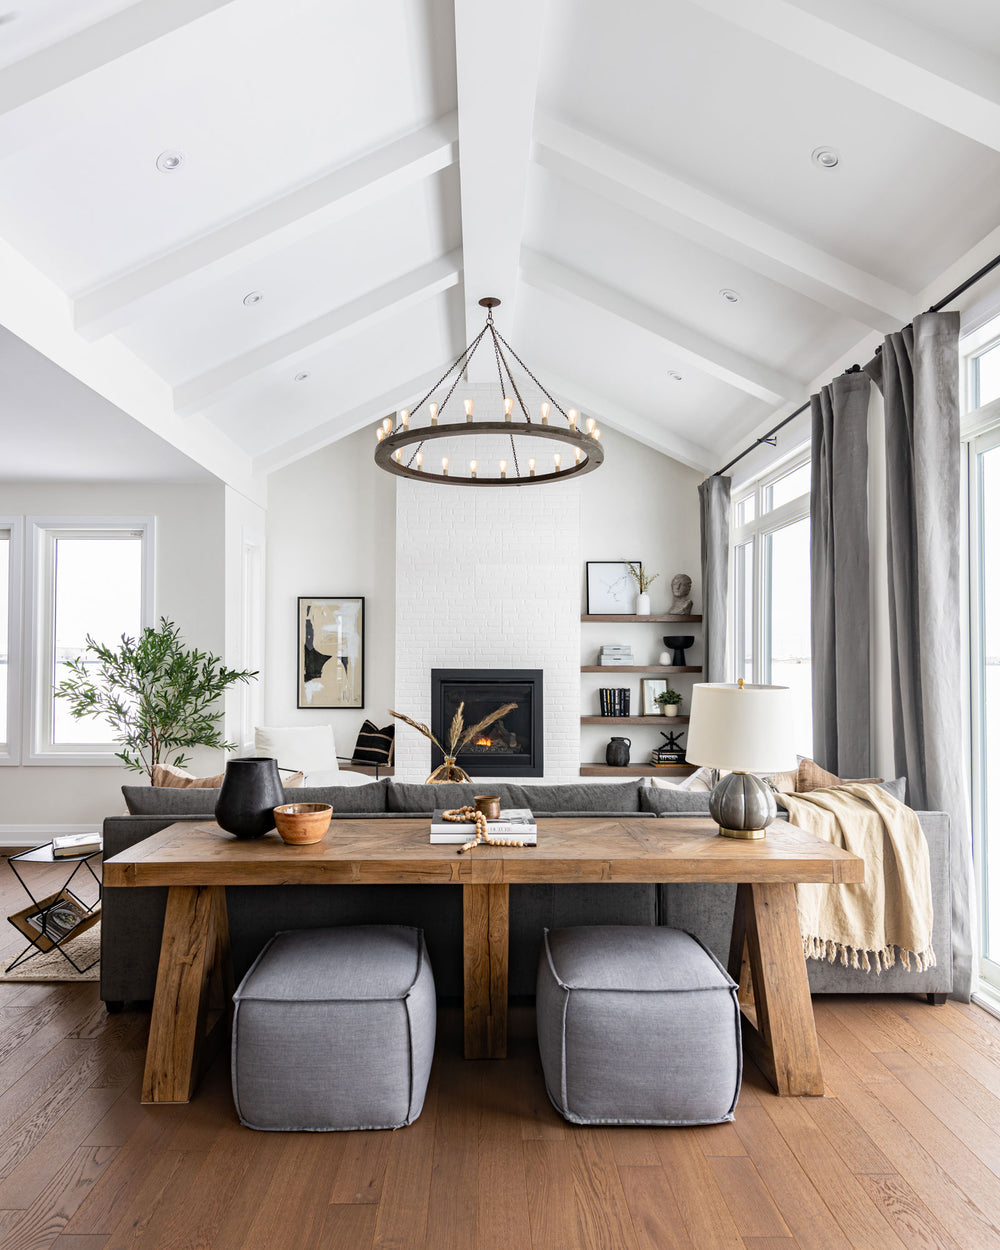 Oversized pendant in living room with wooden ring and evenly spaced bulbs with a medieval look.